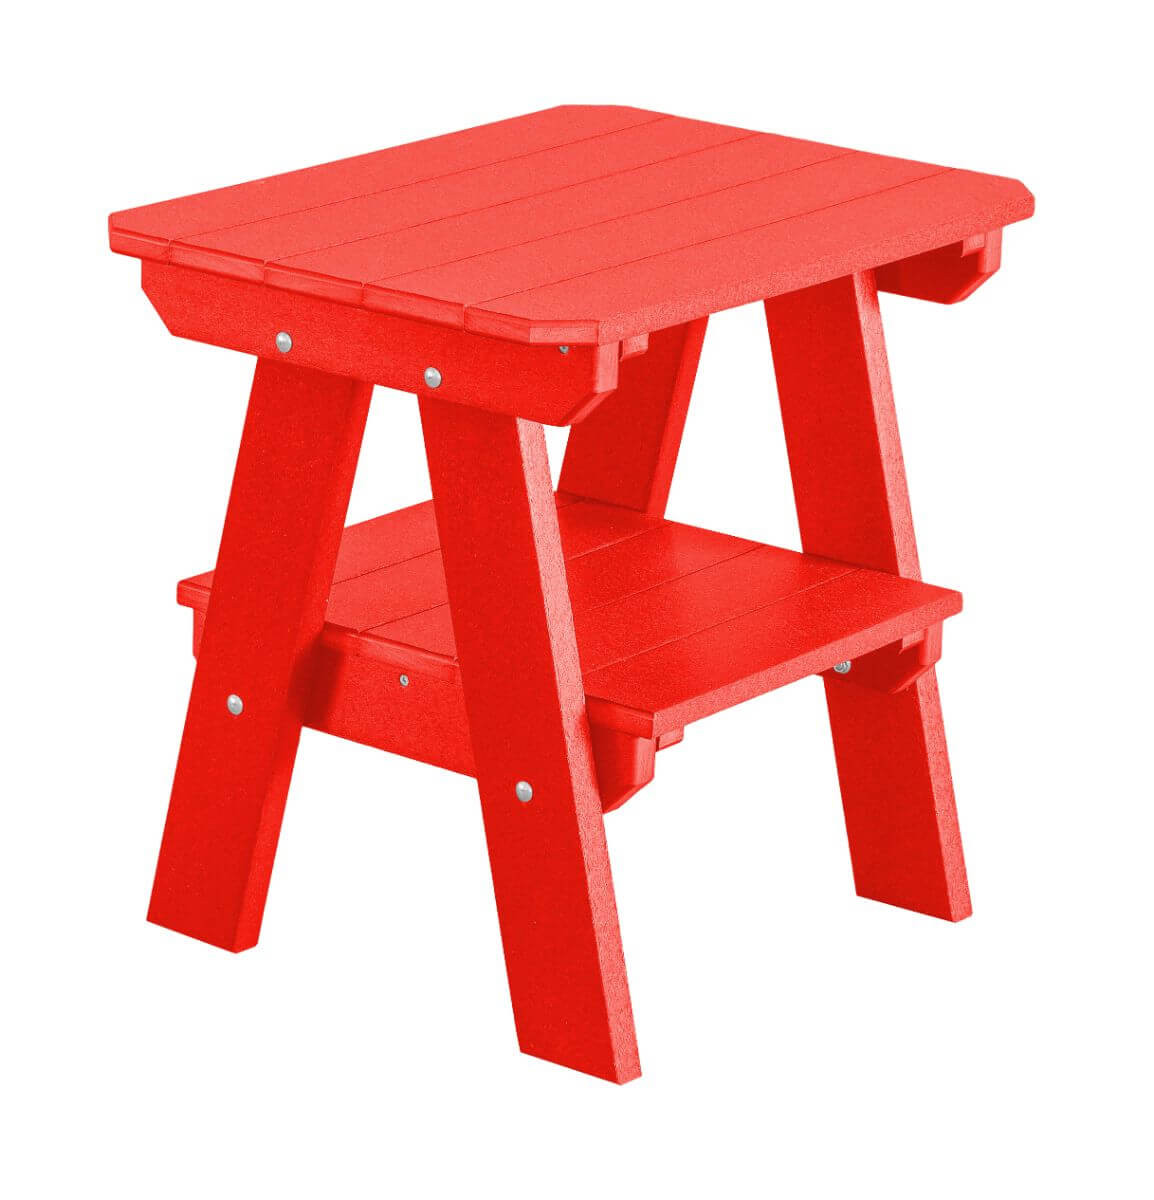 Bright Red Sidra Outdoor End Table